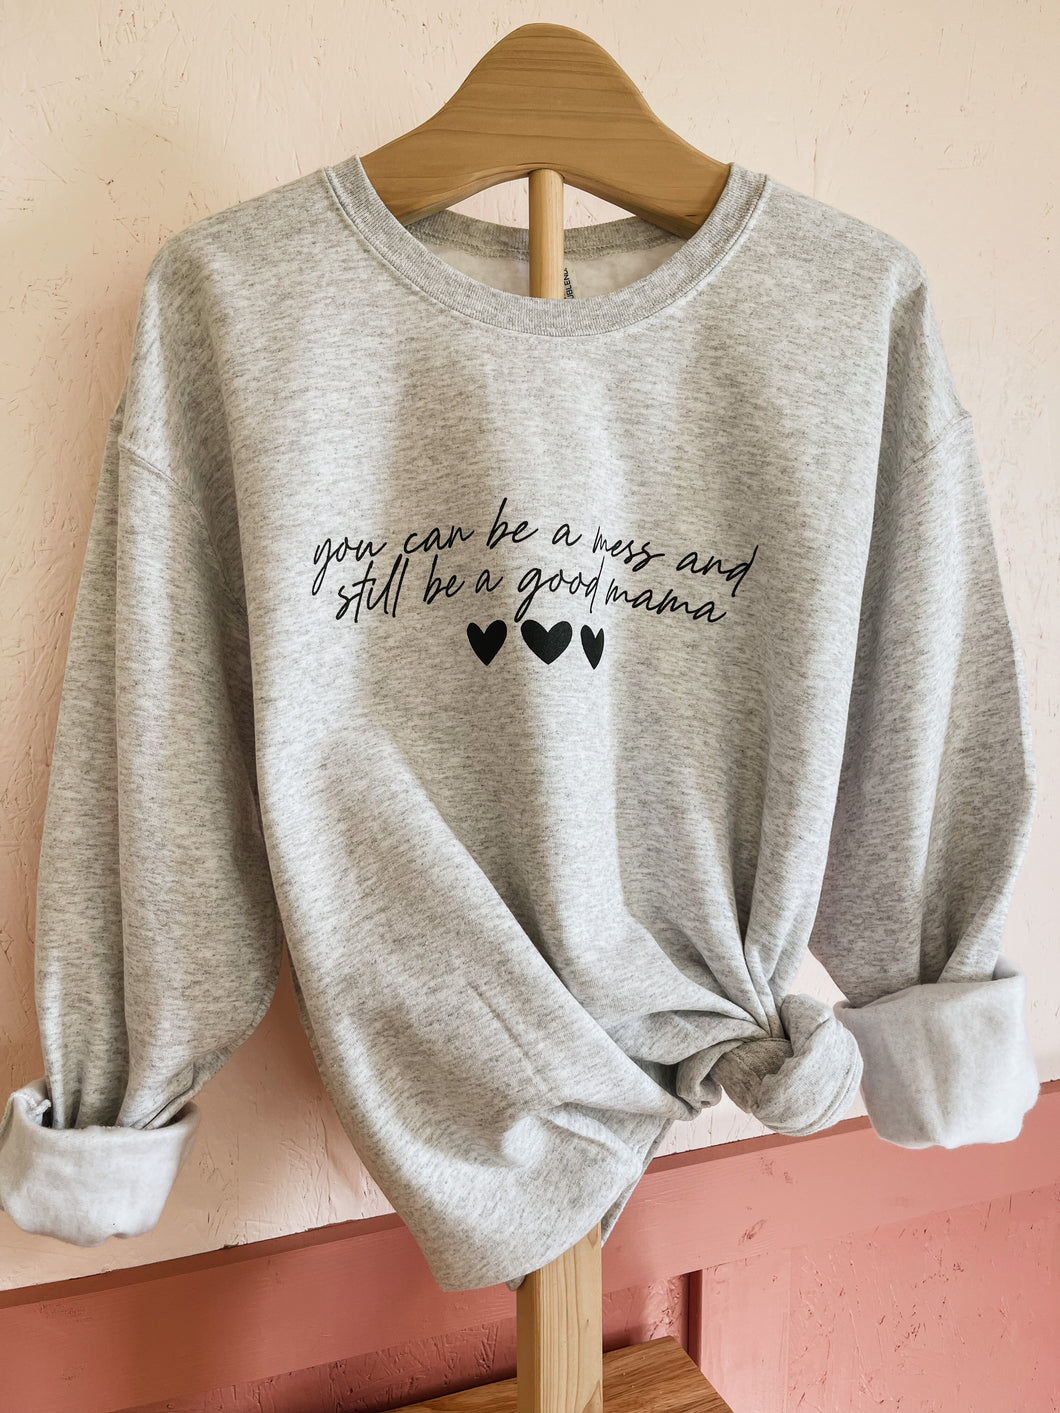 You Can Be a Mess & Still Be a good Mama Sweatshirt